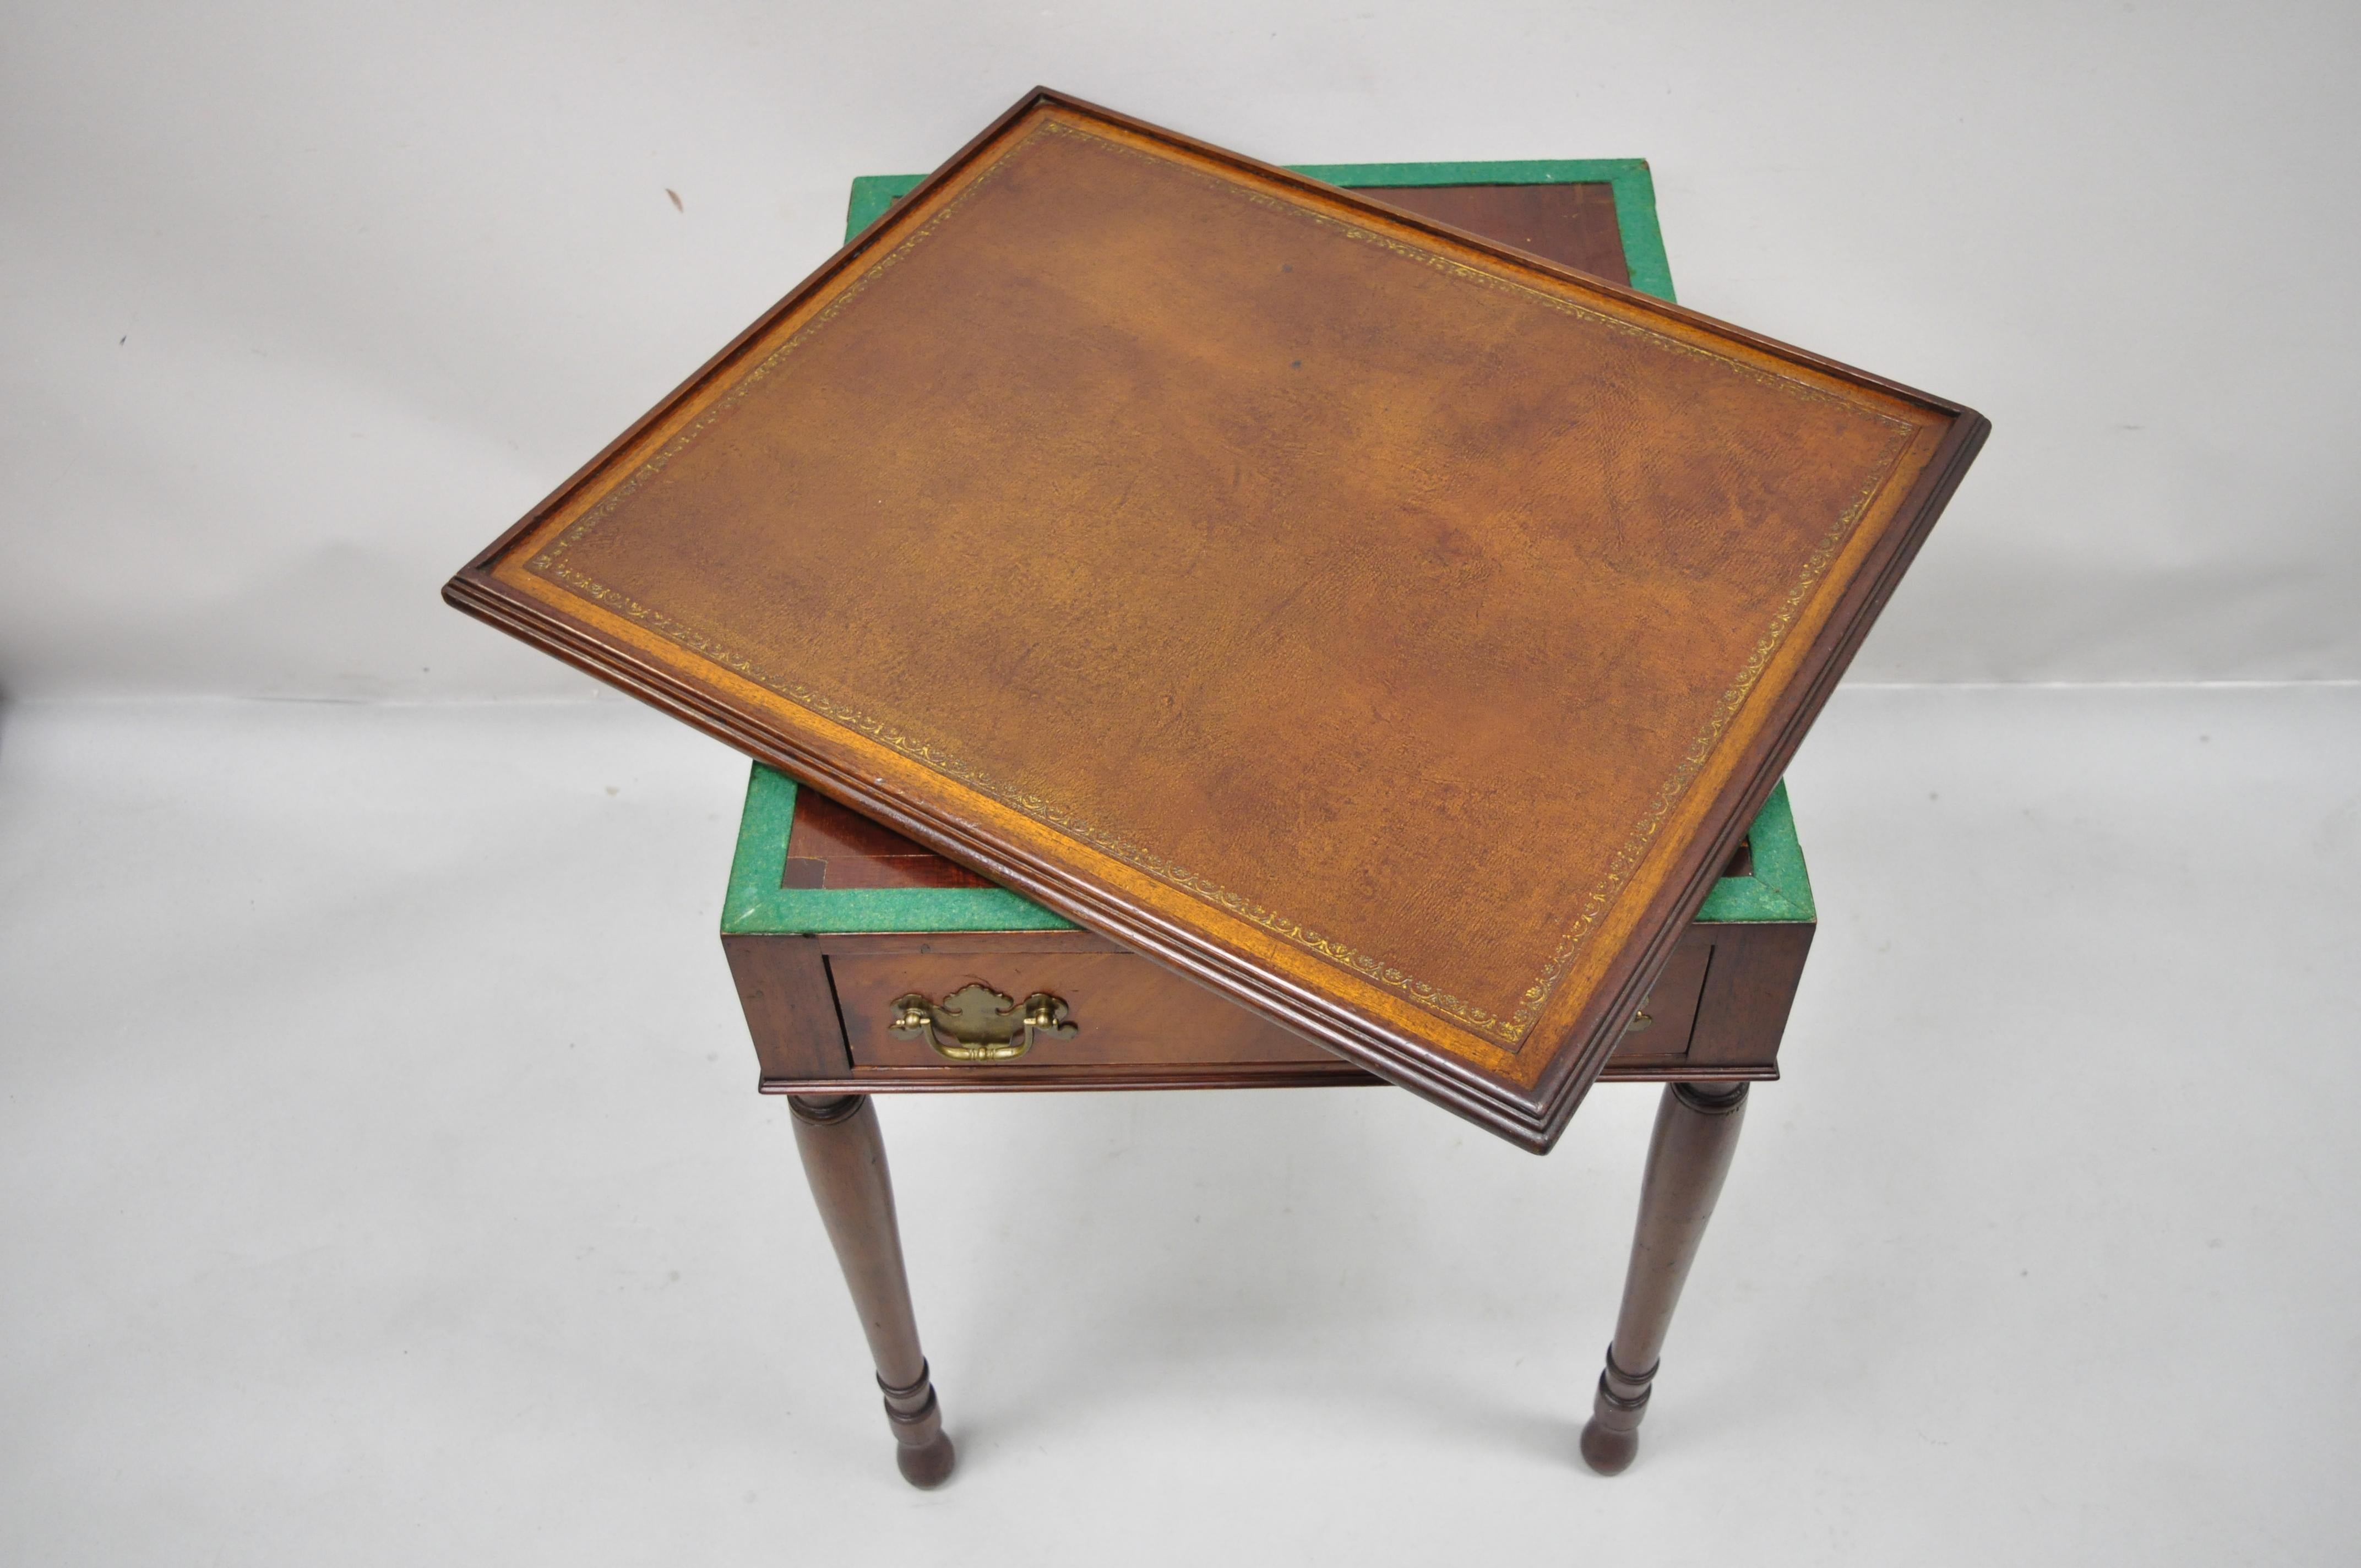 Antique flip top brown leather and inlaid checkerboard one drawer Sheraton style game table. Item features flip top with brown tooled leather on one side and inlaid checker/chessboard game top, beautiful wood grain, 1 dovetailed drawers, tapered